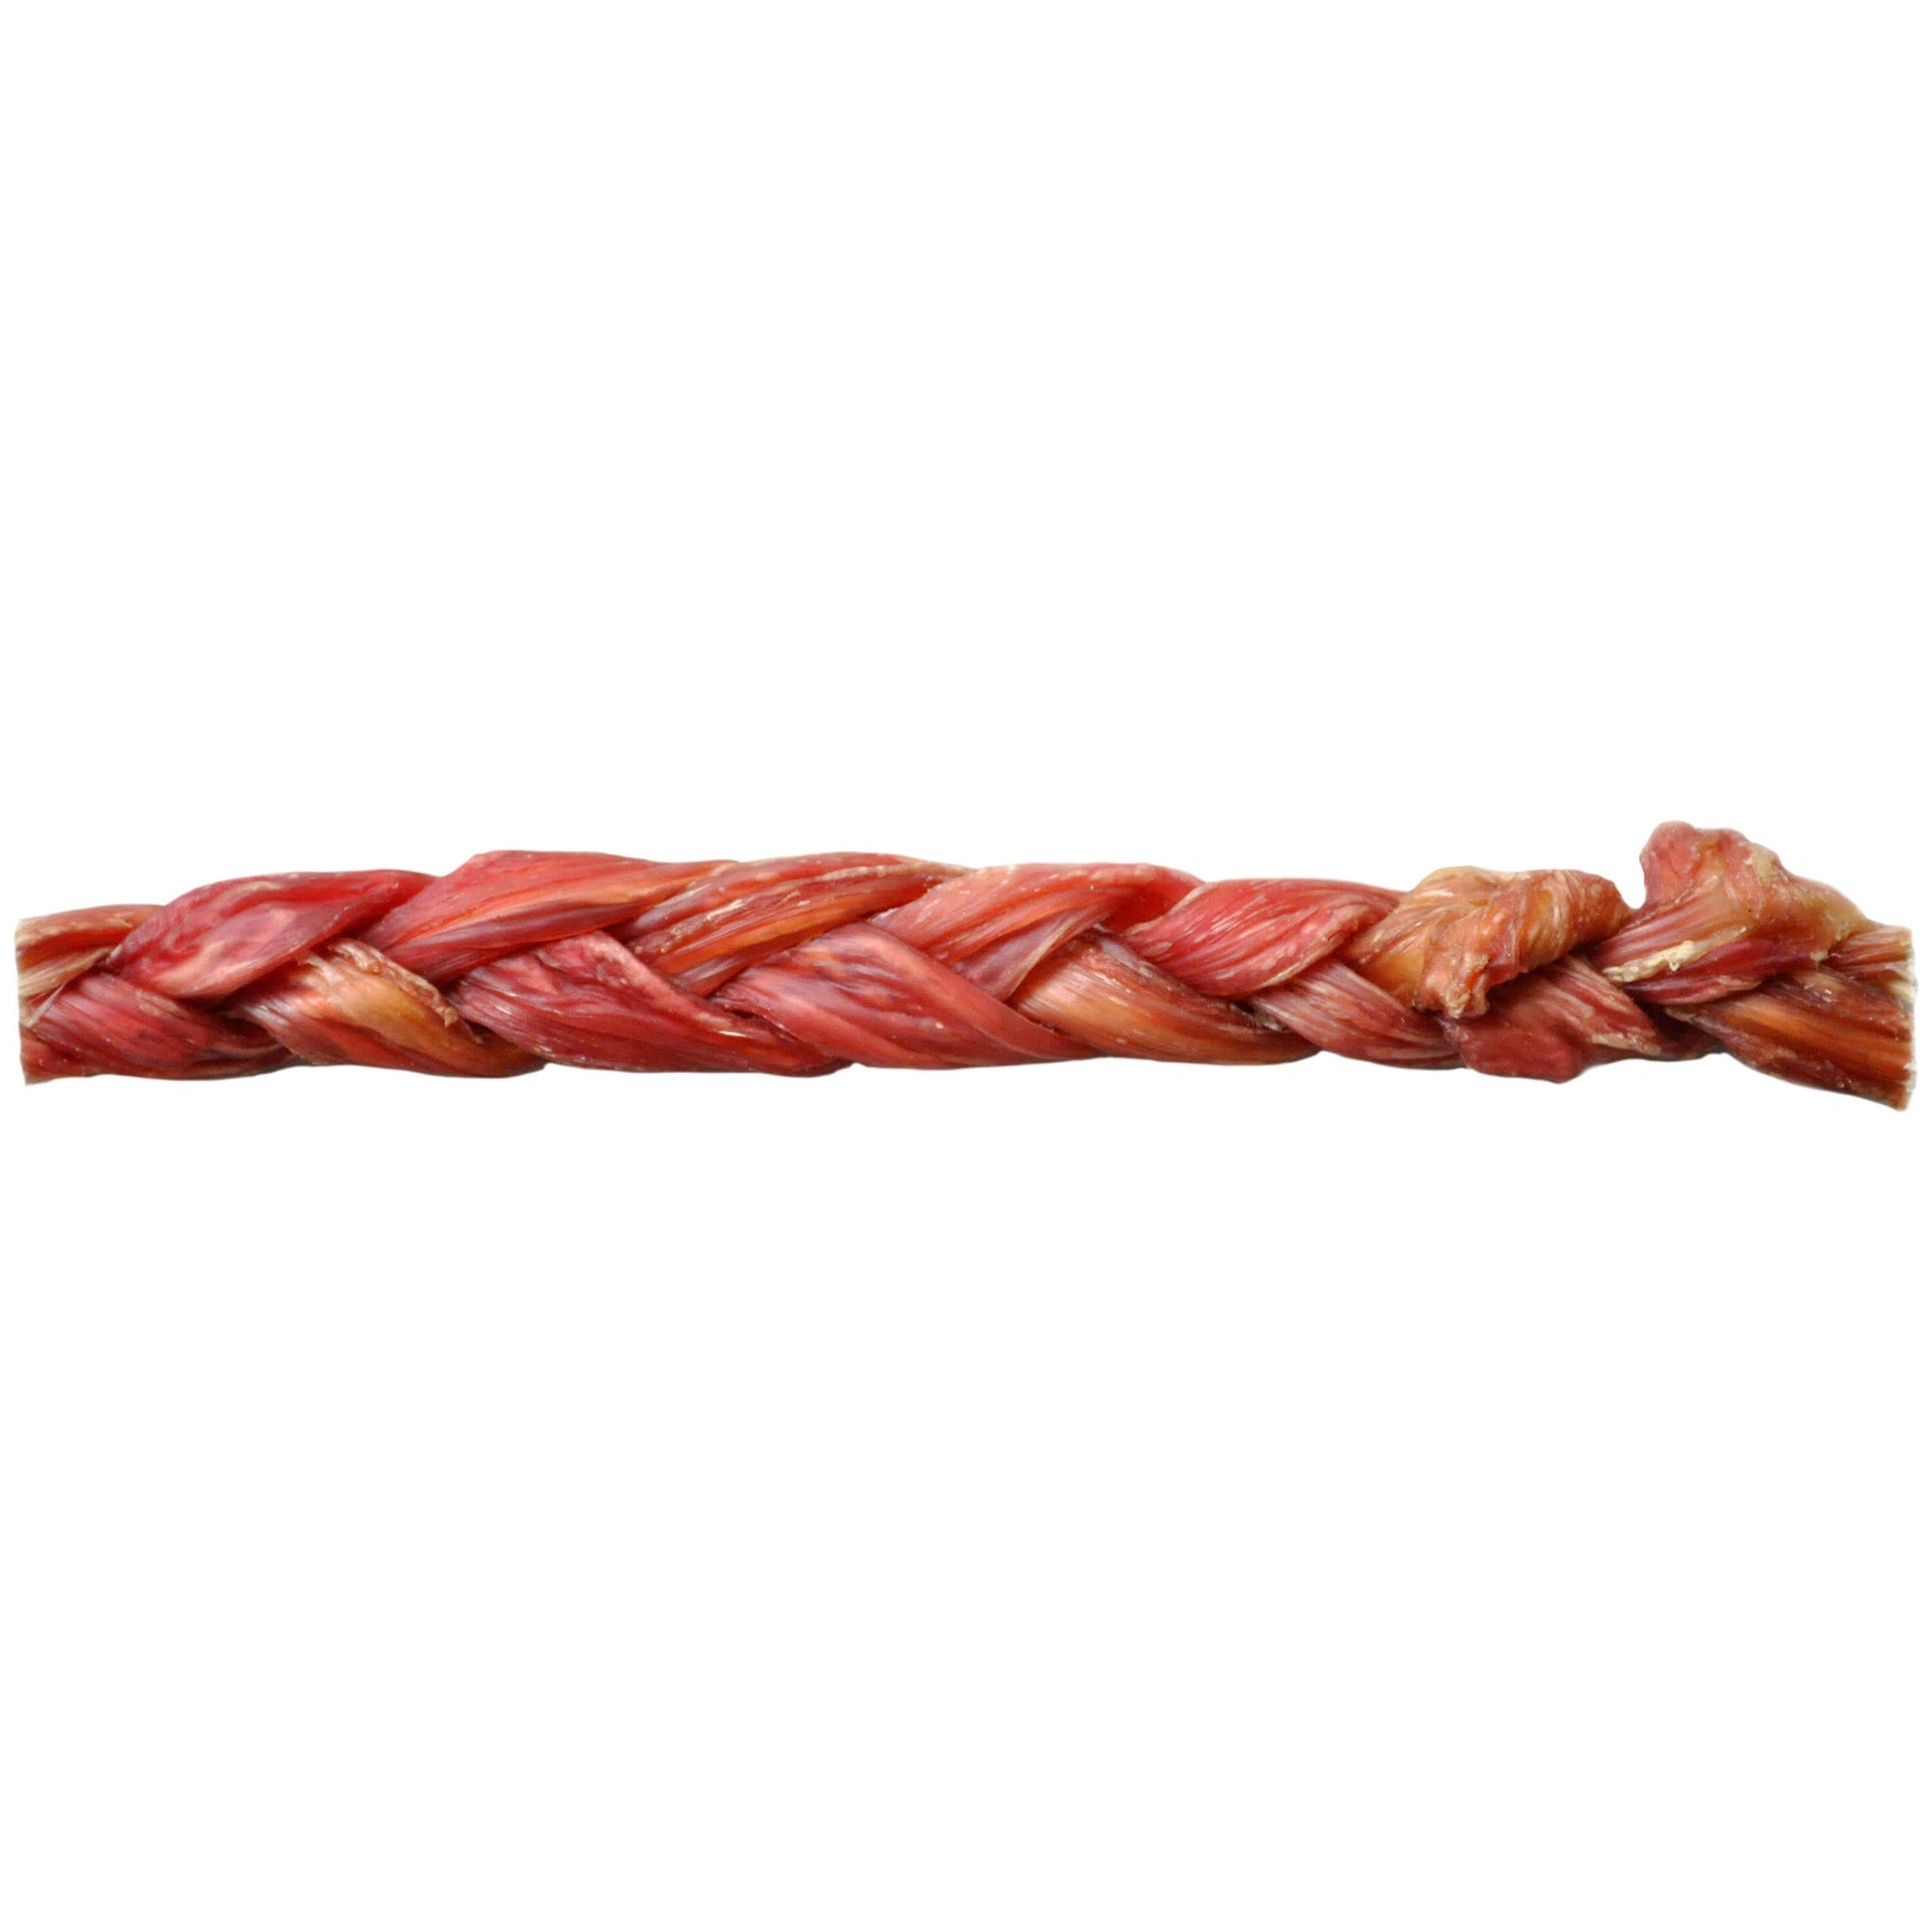 WAG Braided Bully Stick Dog Treat (122916000142) [default_color]